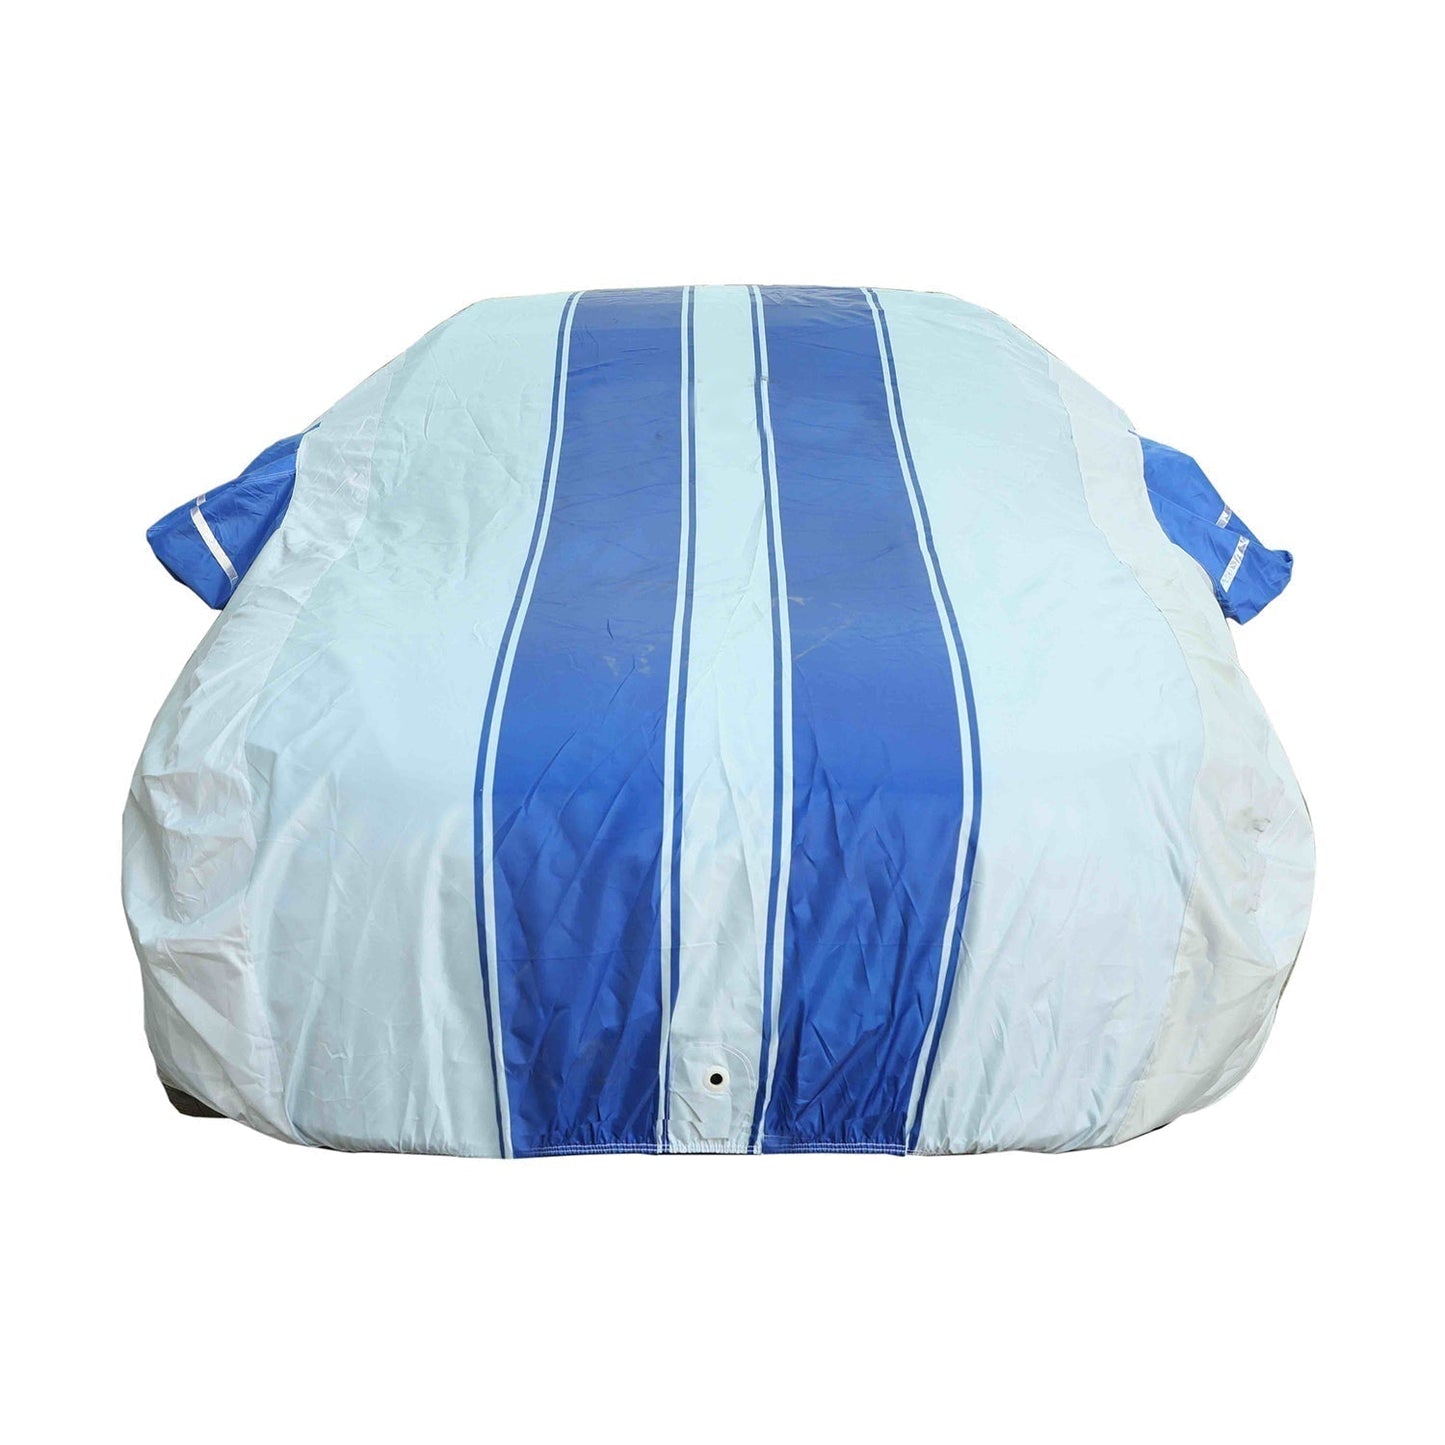 Oshotto 100% Blue dustproof and Water Resistant Car Body Cover with Mirror Pockets For Fiat Linea